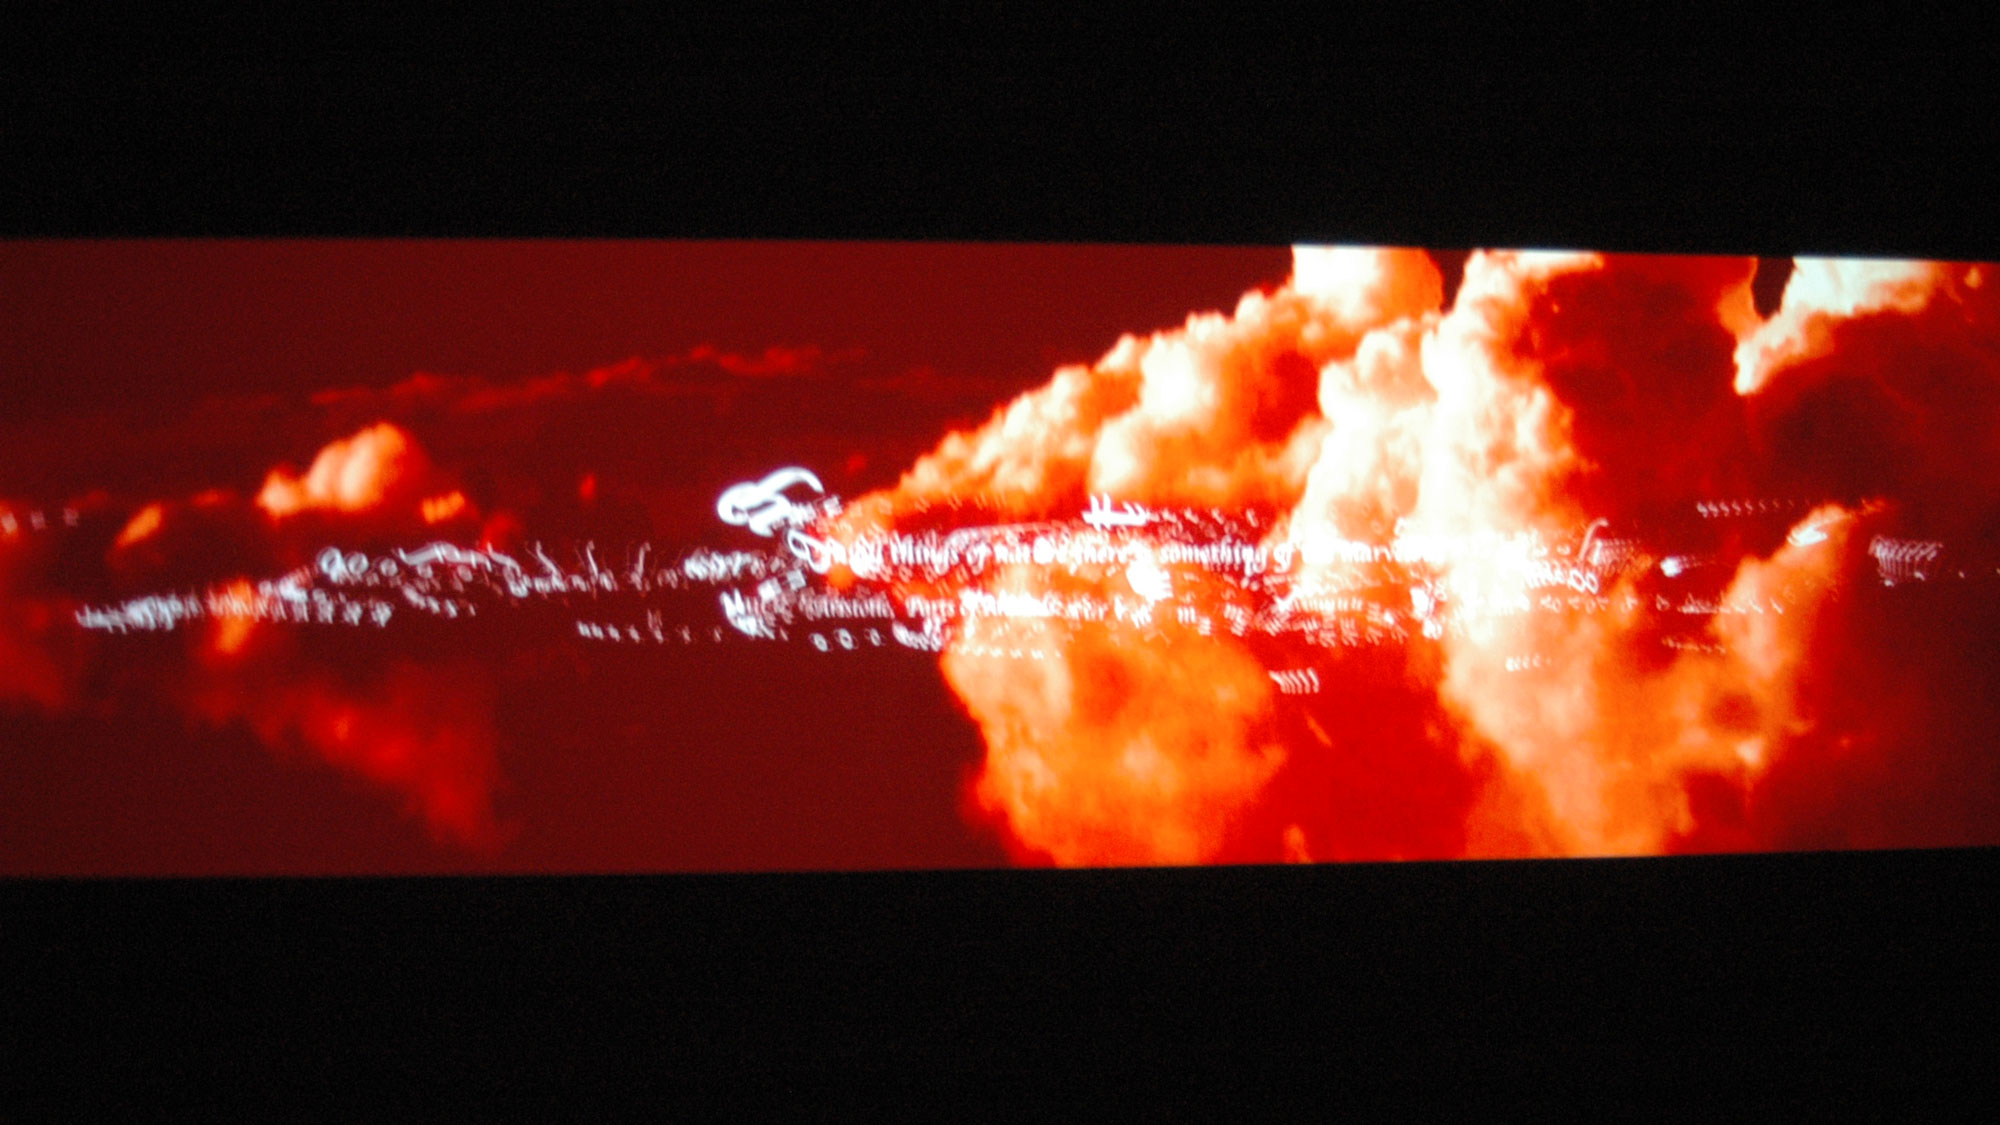 Red tinged clouds with illegible words in white script font across them projected on screen.